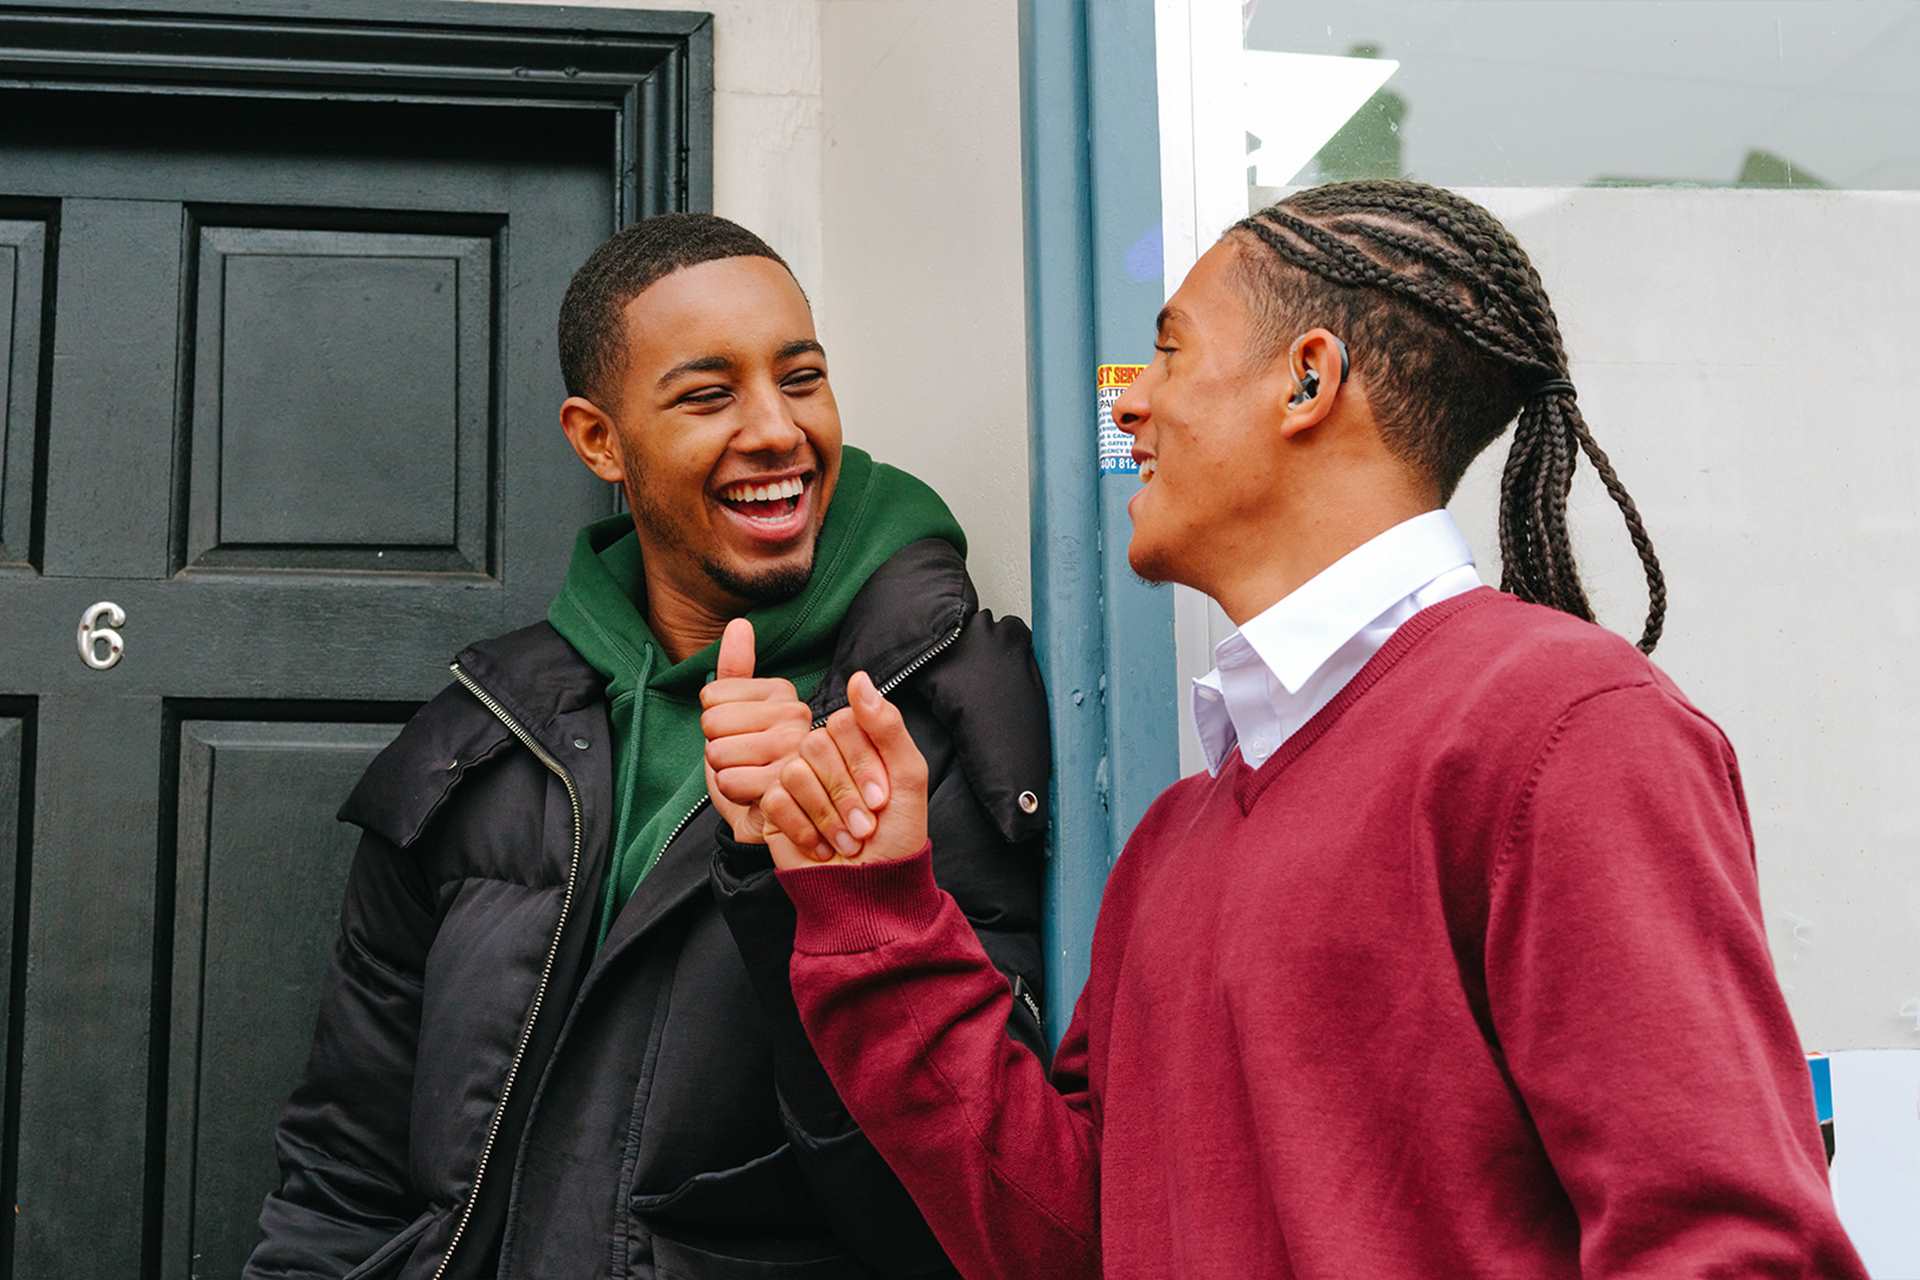 A Black teenage boy wearing a hearing aid bumping fists with a young Black man outside a front door.